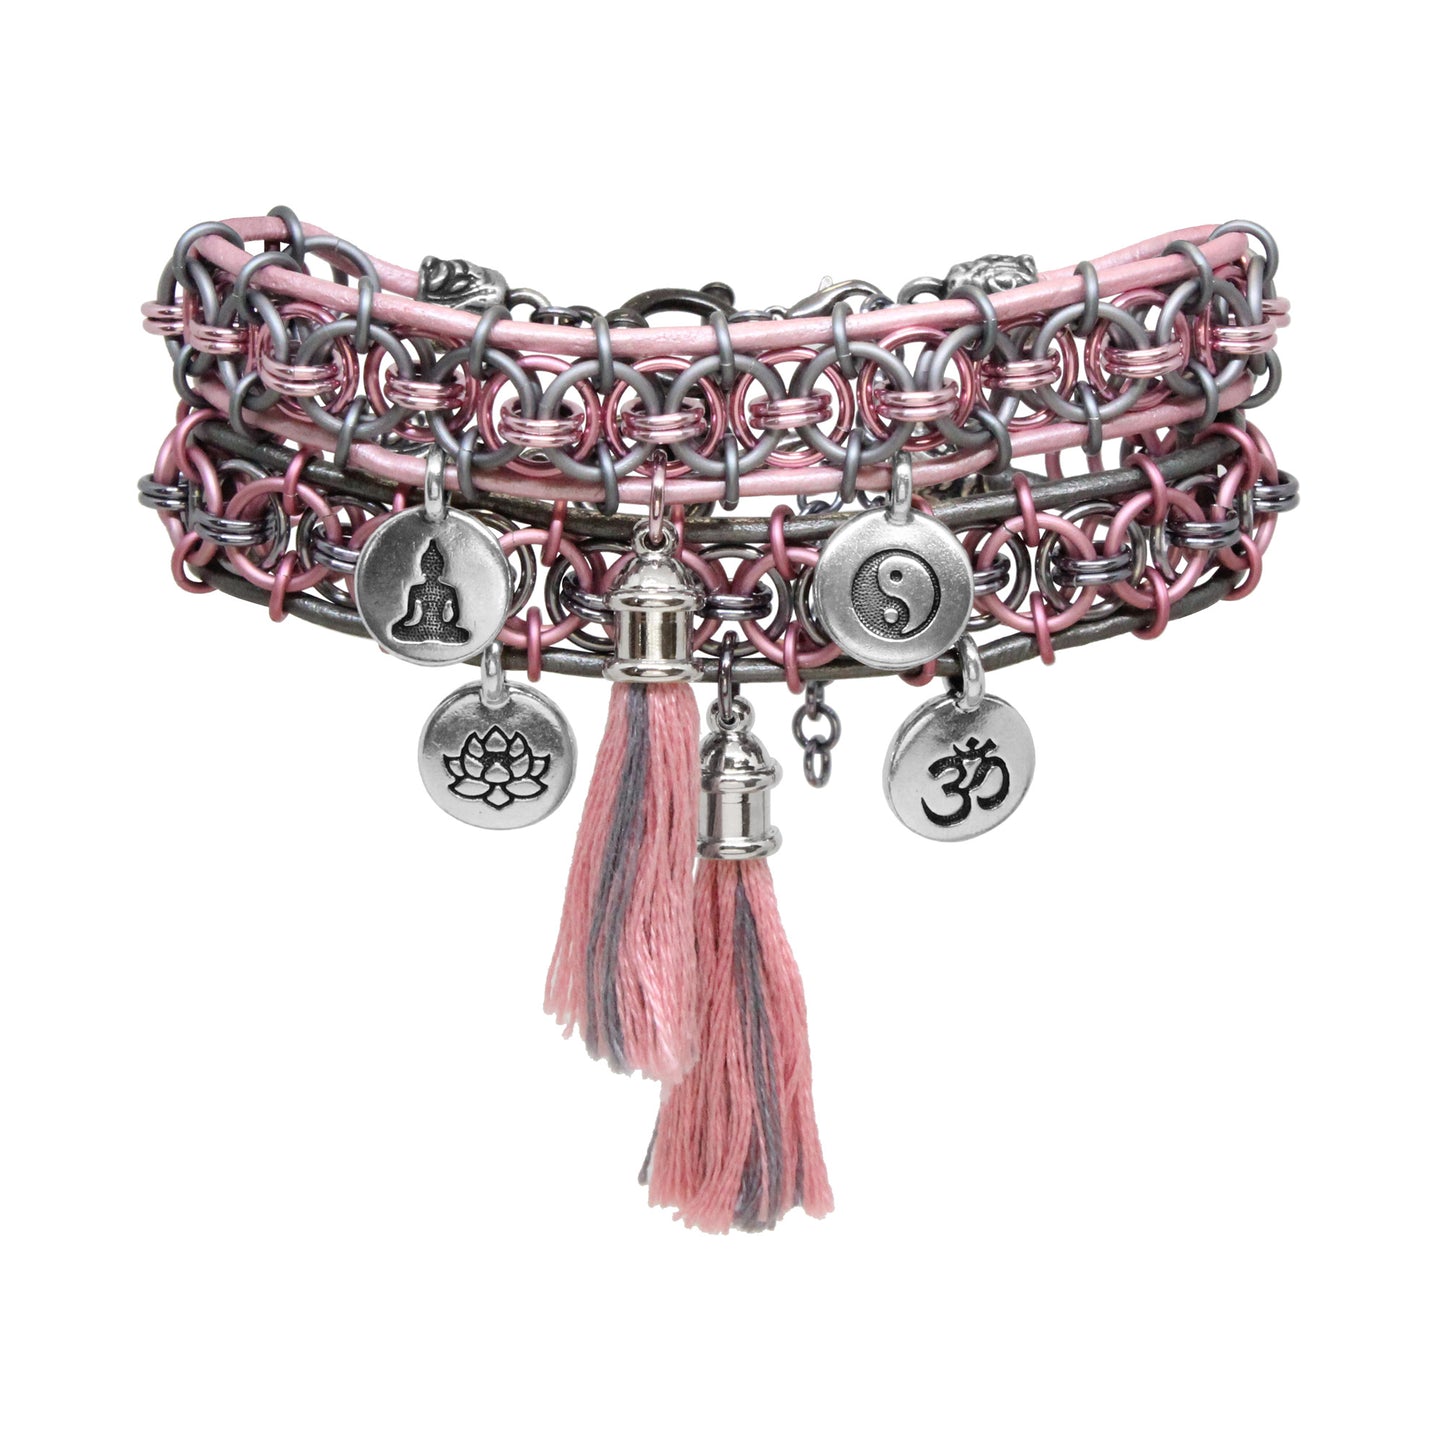 Pink and Grey Helm Chain Bracelet Set with leather, charms, and tassels / adjustable clasp for 6.5 to 7.5 inch wrist